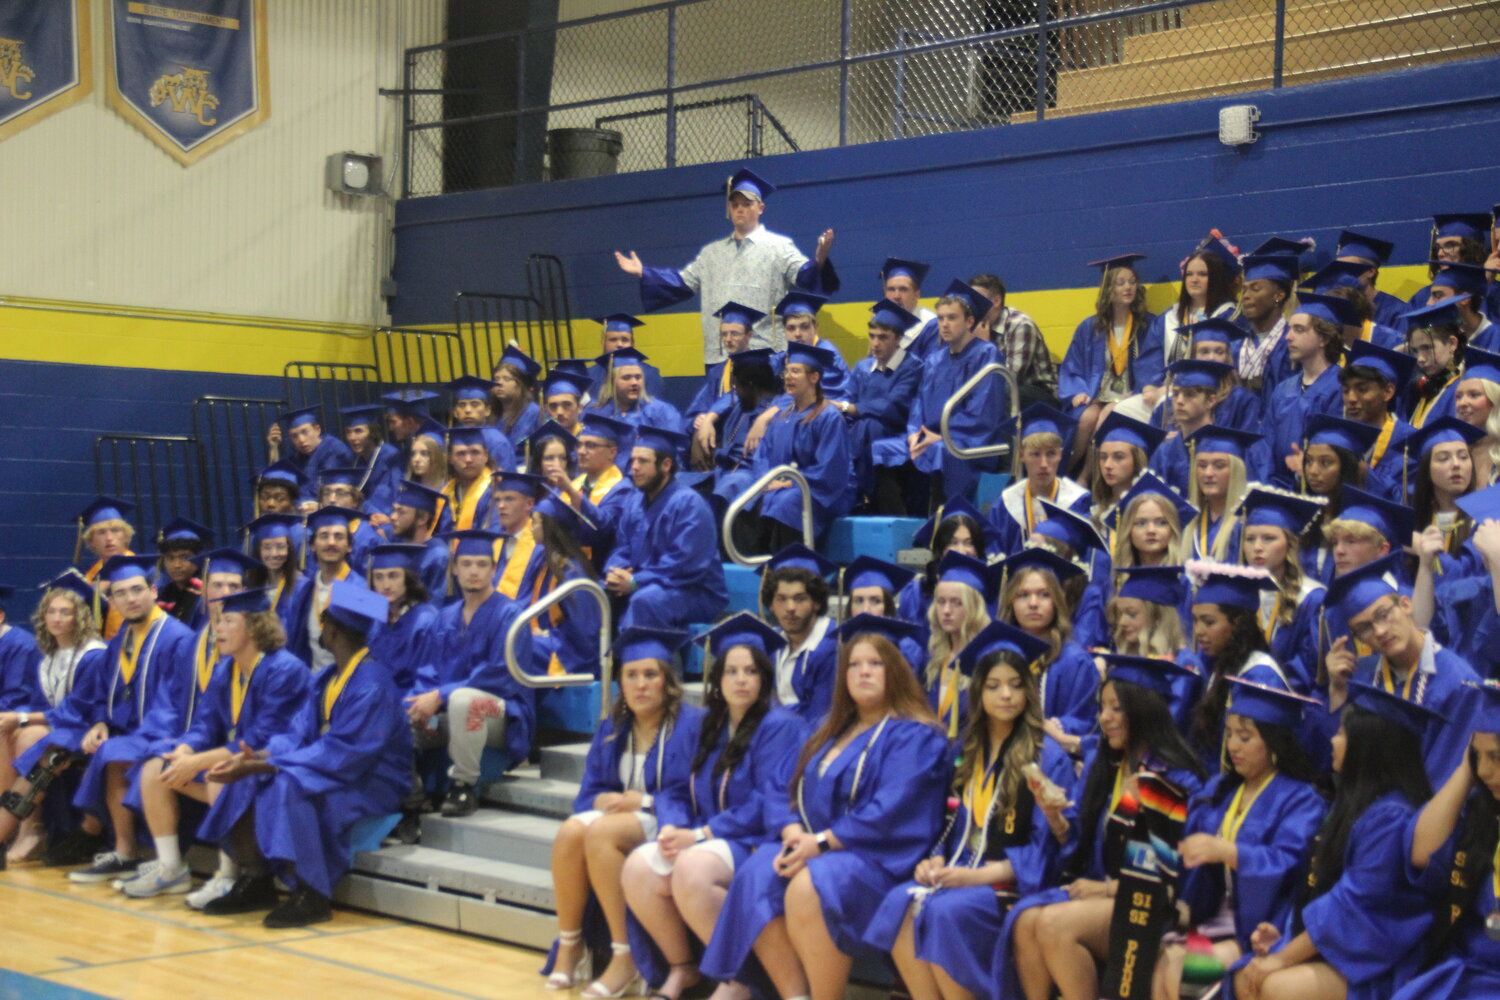 One Wright City High School senior provides some humor as students prepare for the class picture.